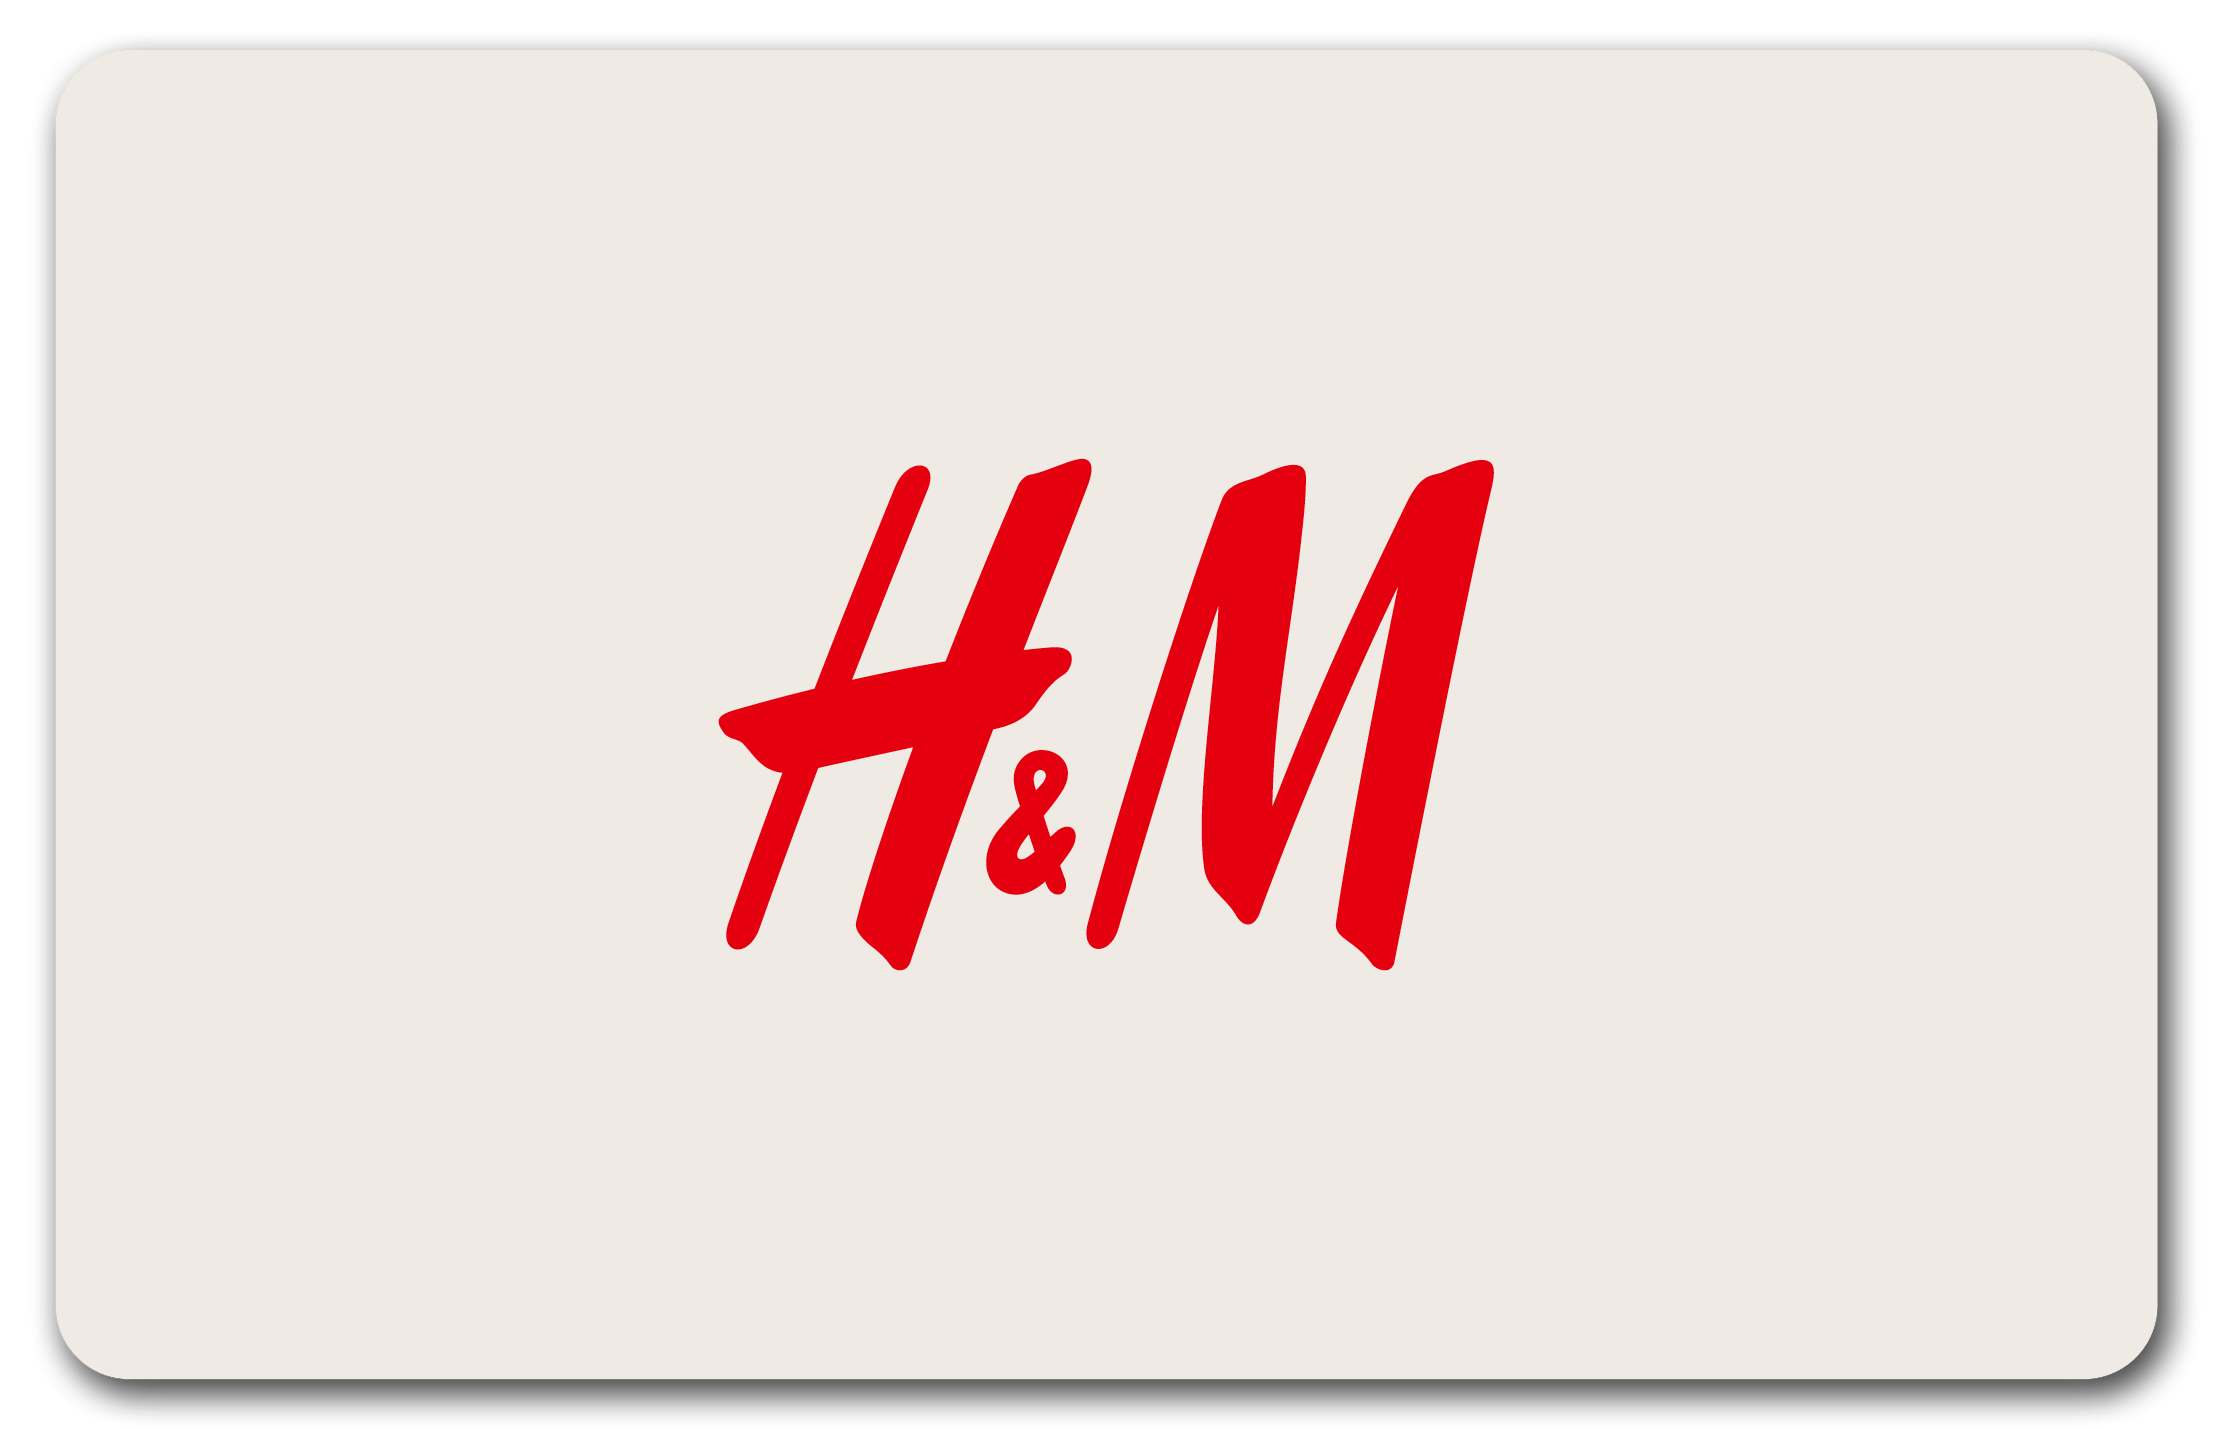 H&M Le Chesnay